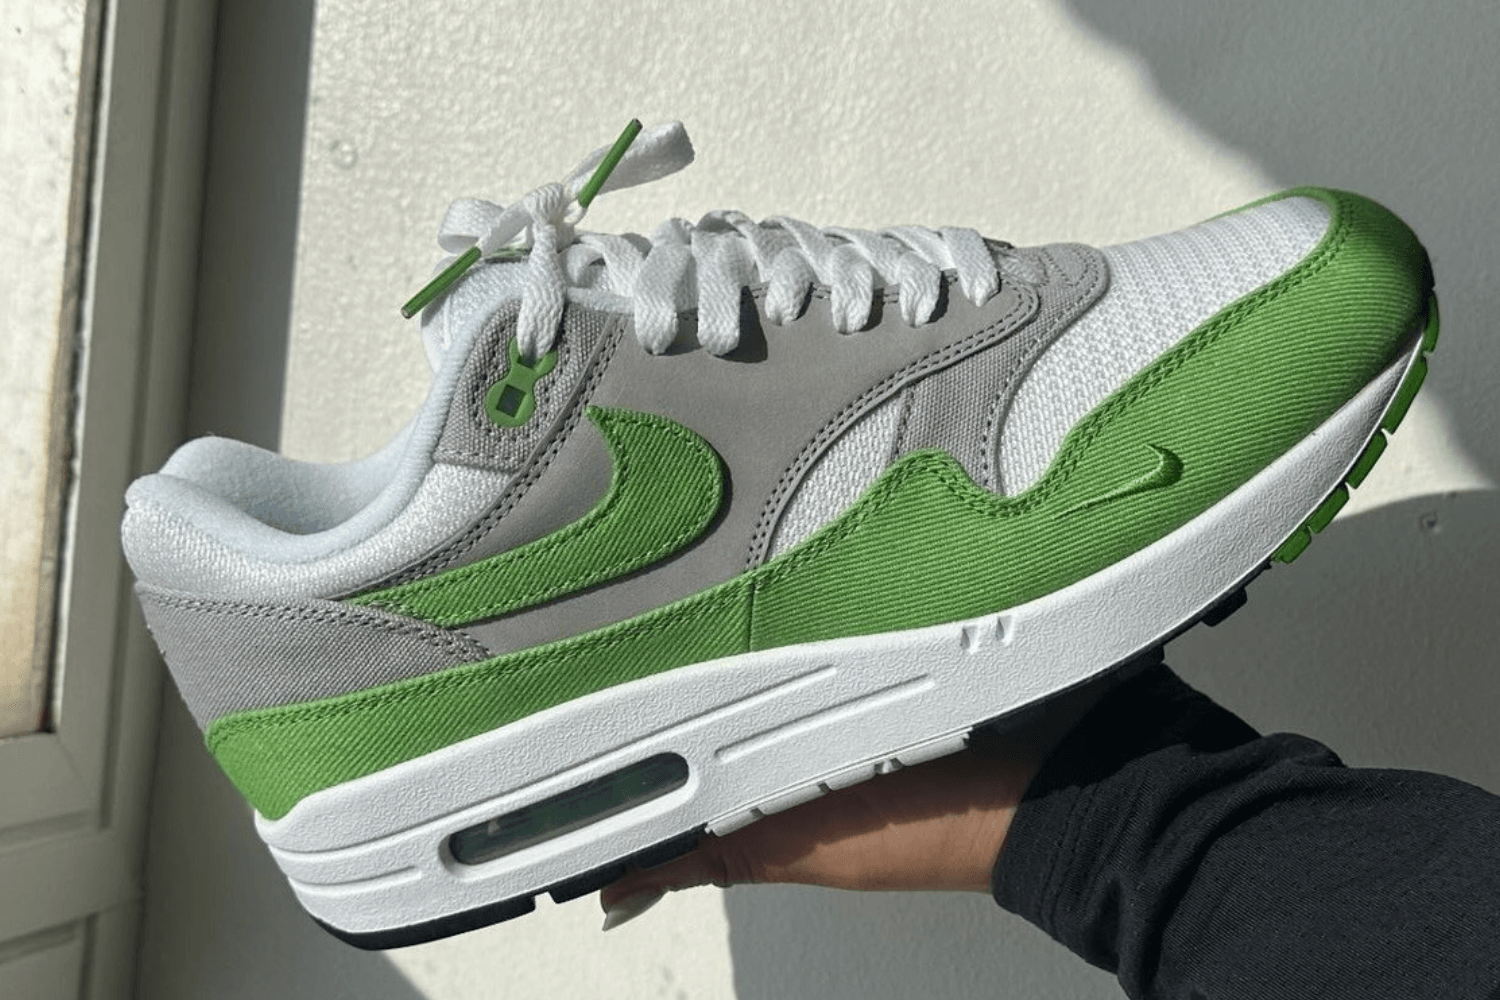 Up-close images of the Patta x Nike Air Max 1 'Chlorophyll' 2024